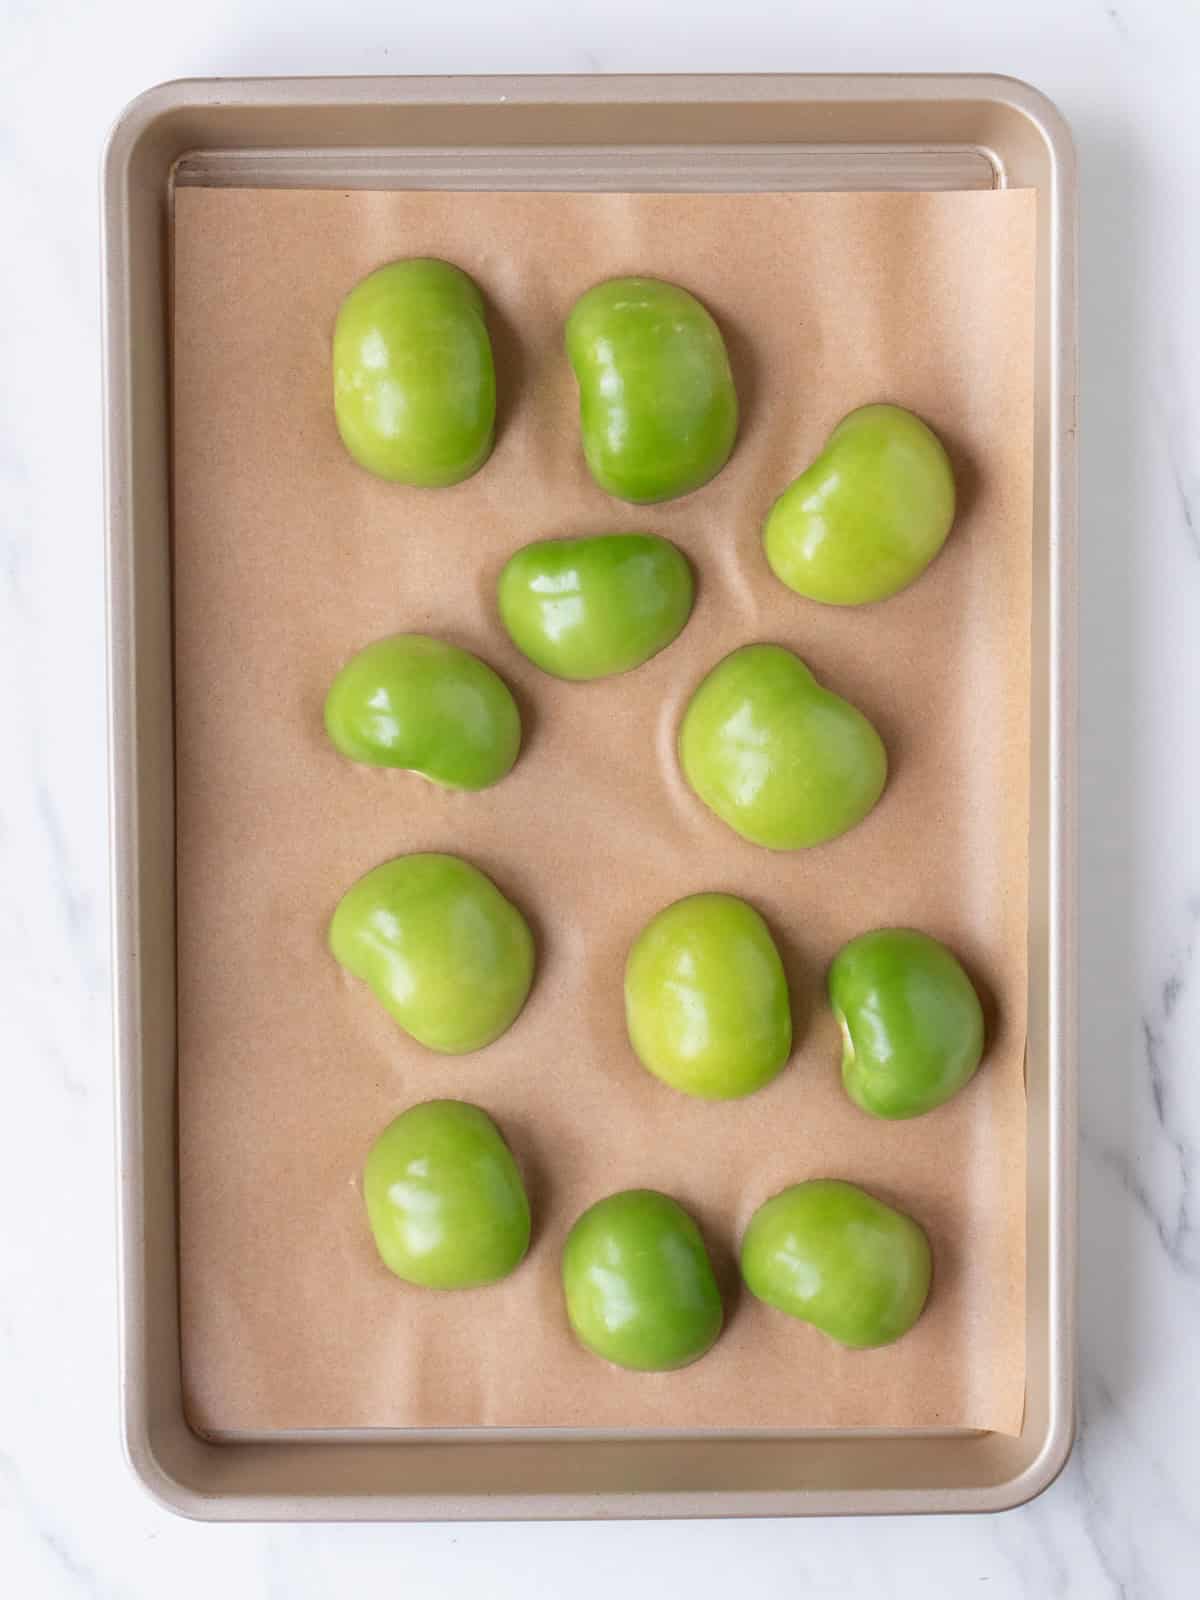 A sheet pan lined with parchment paper, with halved tomatillos, flat side on sheet.